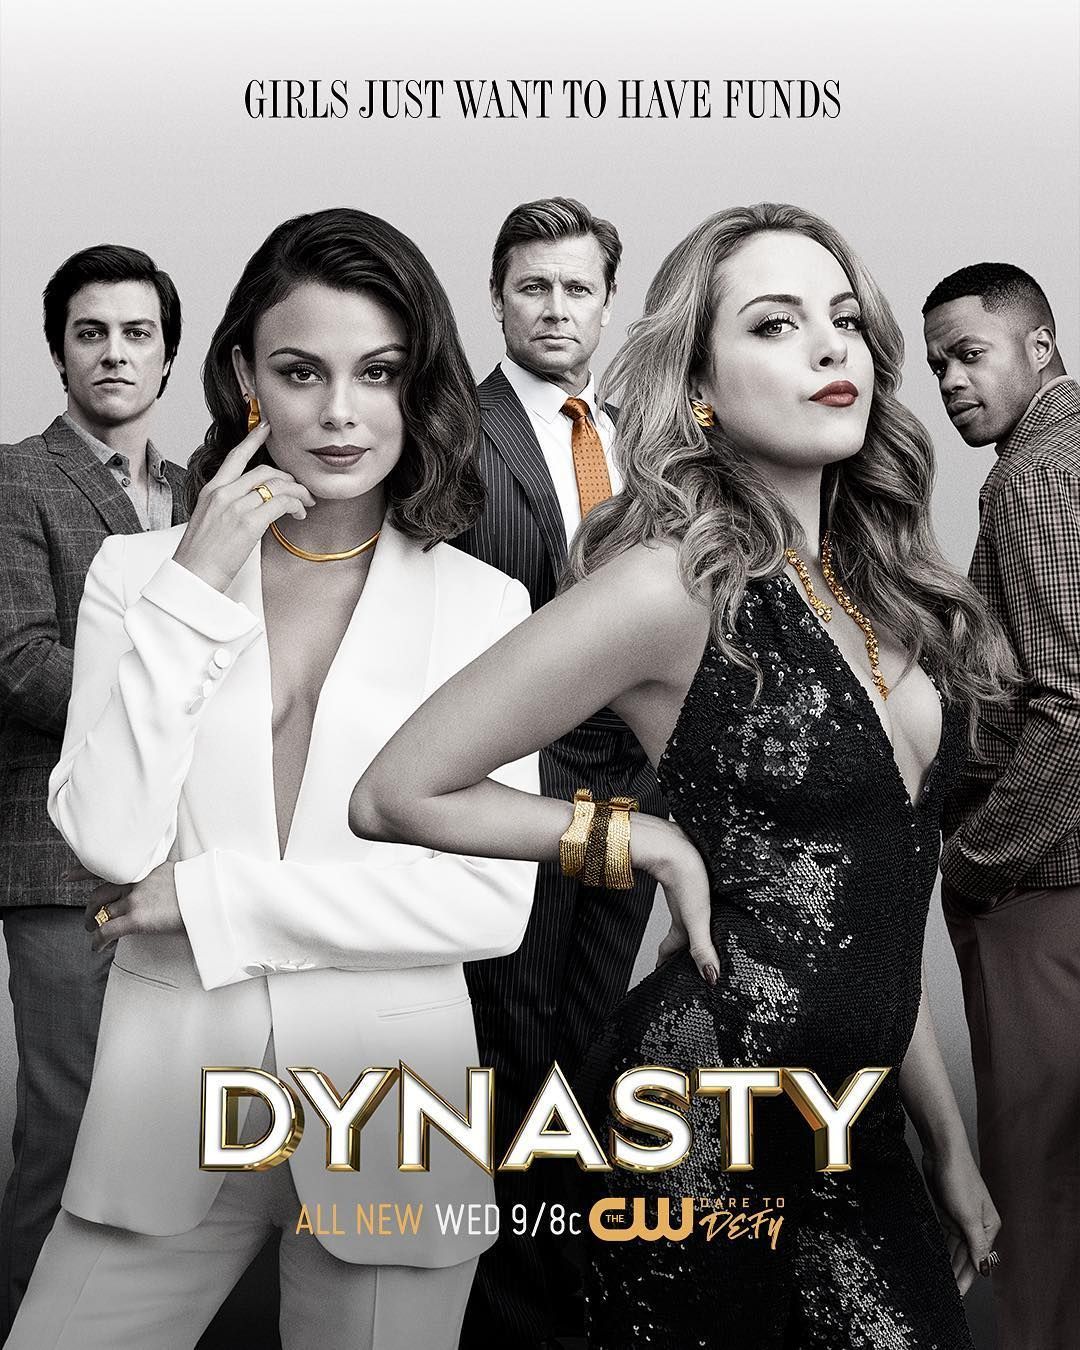 Likes, 68 Comments on Instagram: “Girls just want to have funds. Stream #Dynasty NOW on The CW A. Serie tv, Film da guardare, Attori